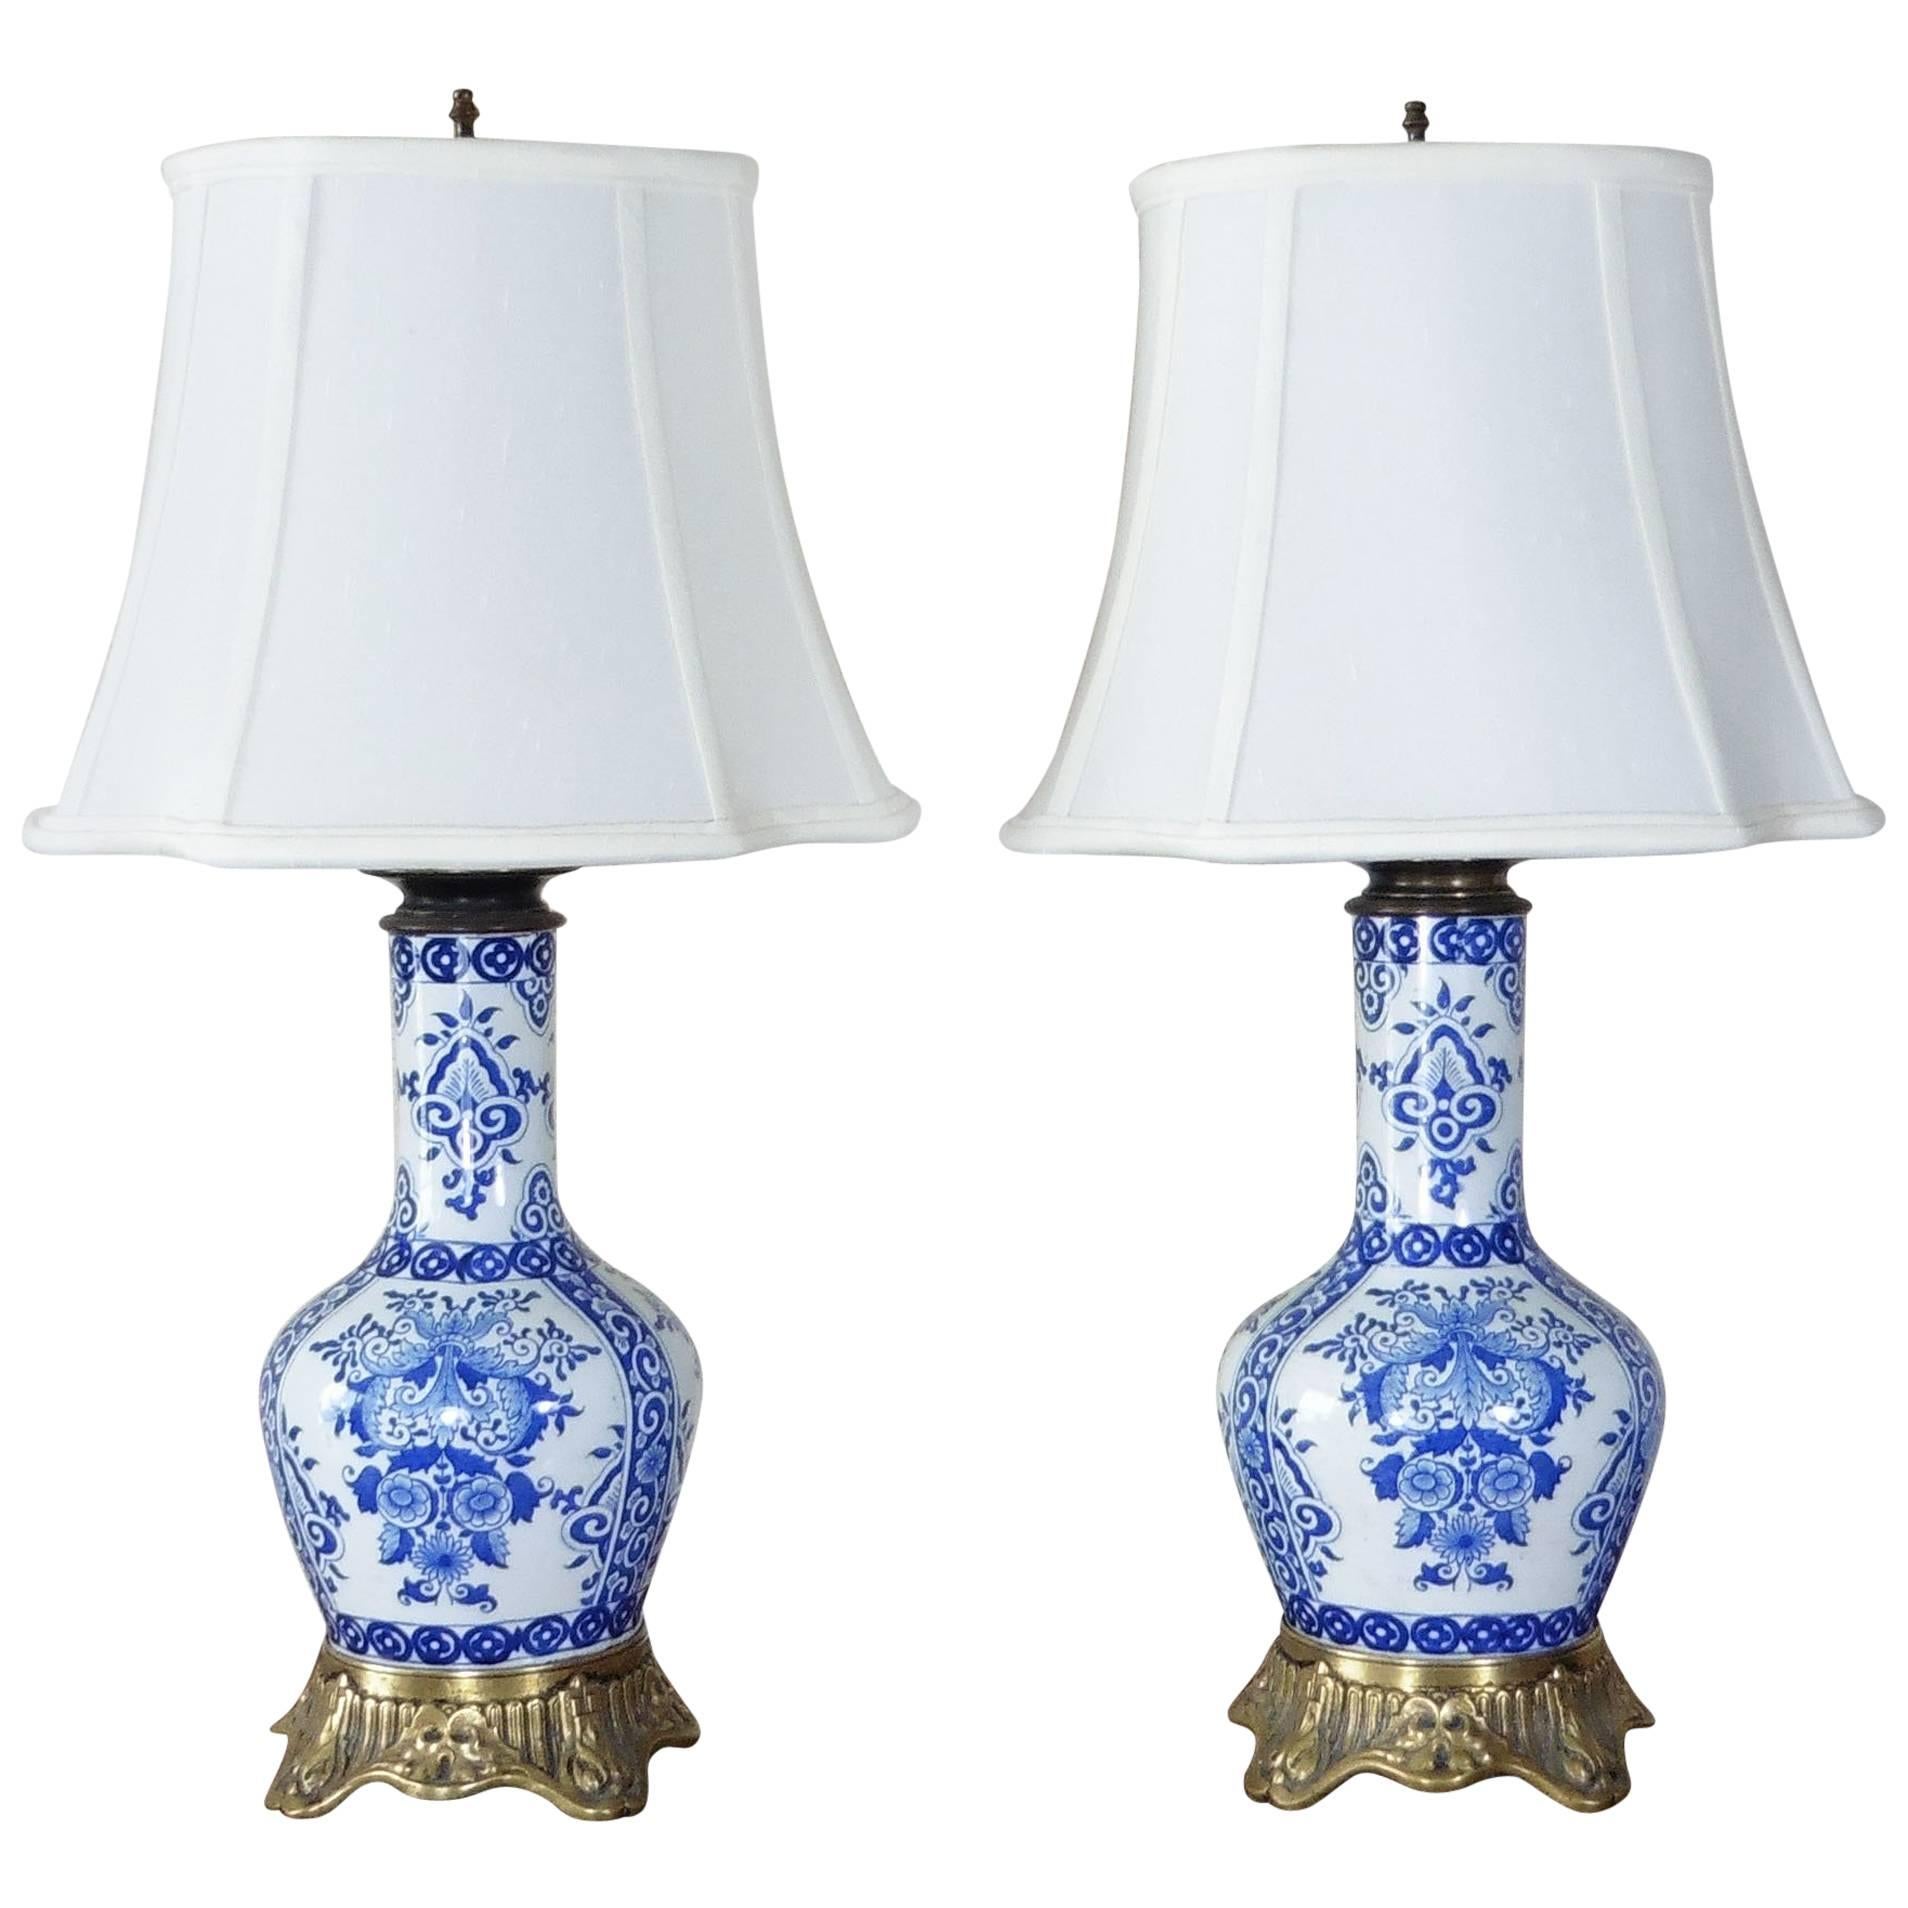 Pair of 19th Century Blue and White Faience Bronze-Mounted Lamps Gien